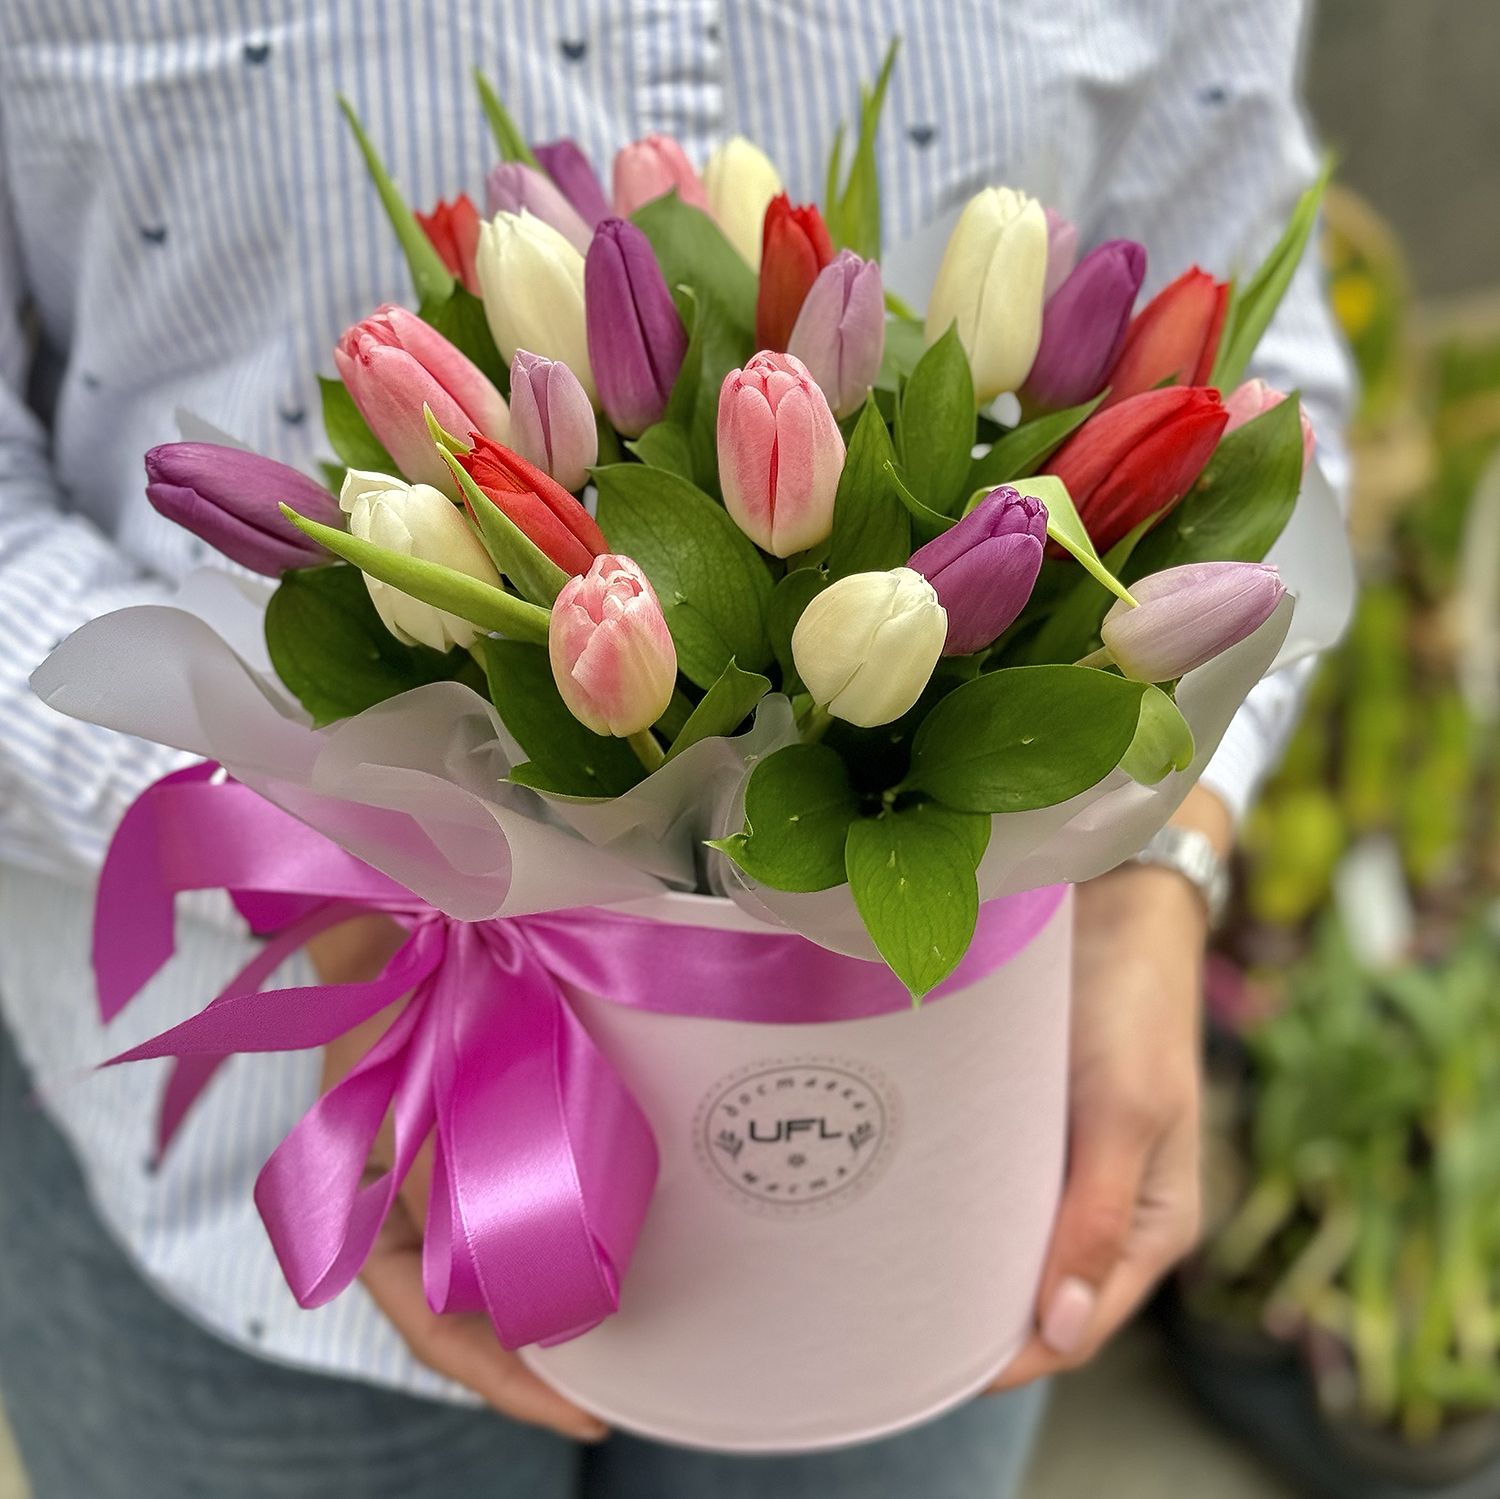 25 tulips in a box